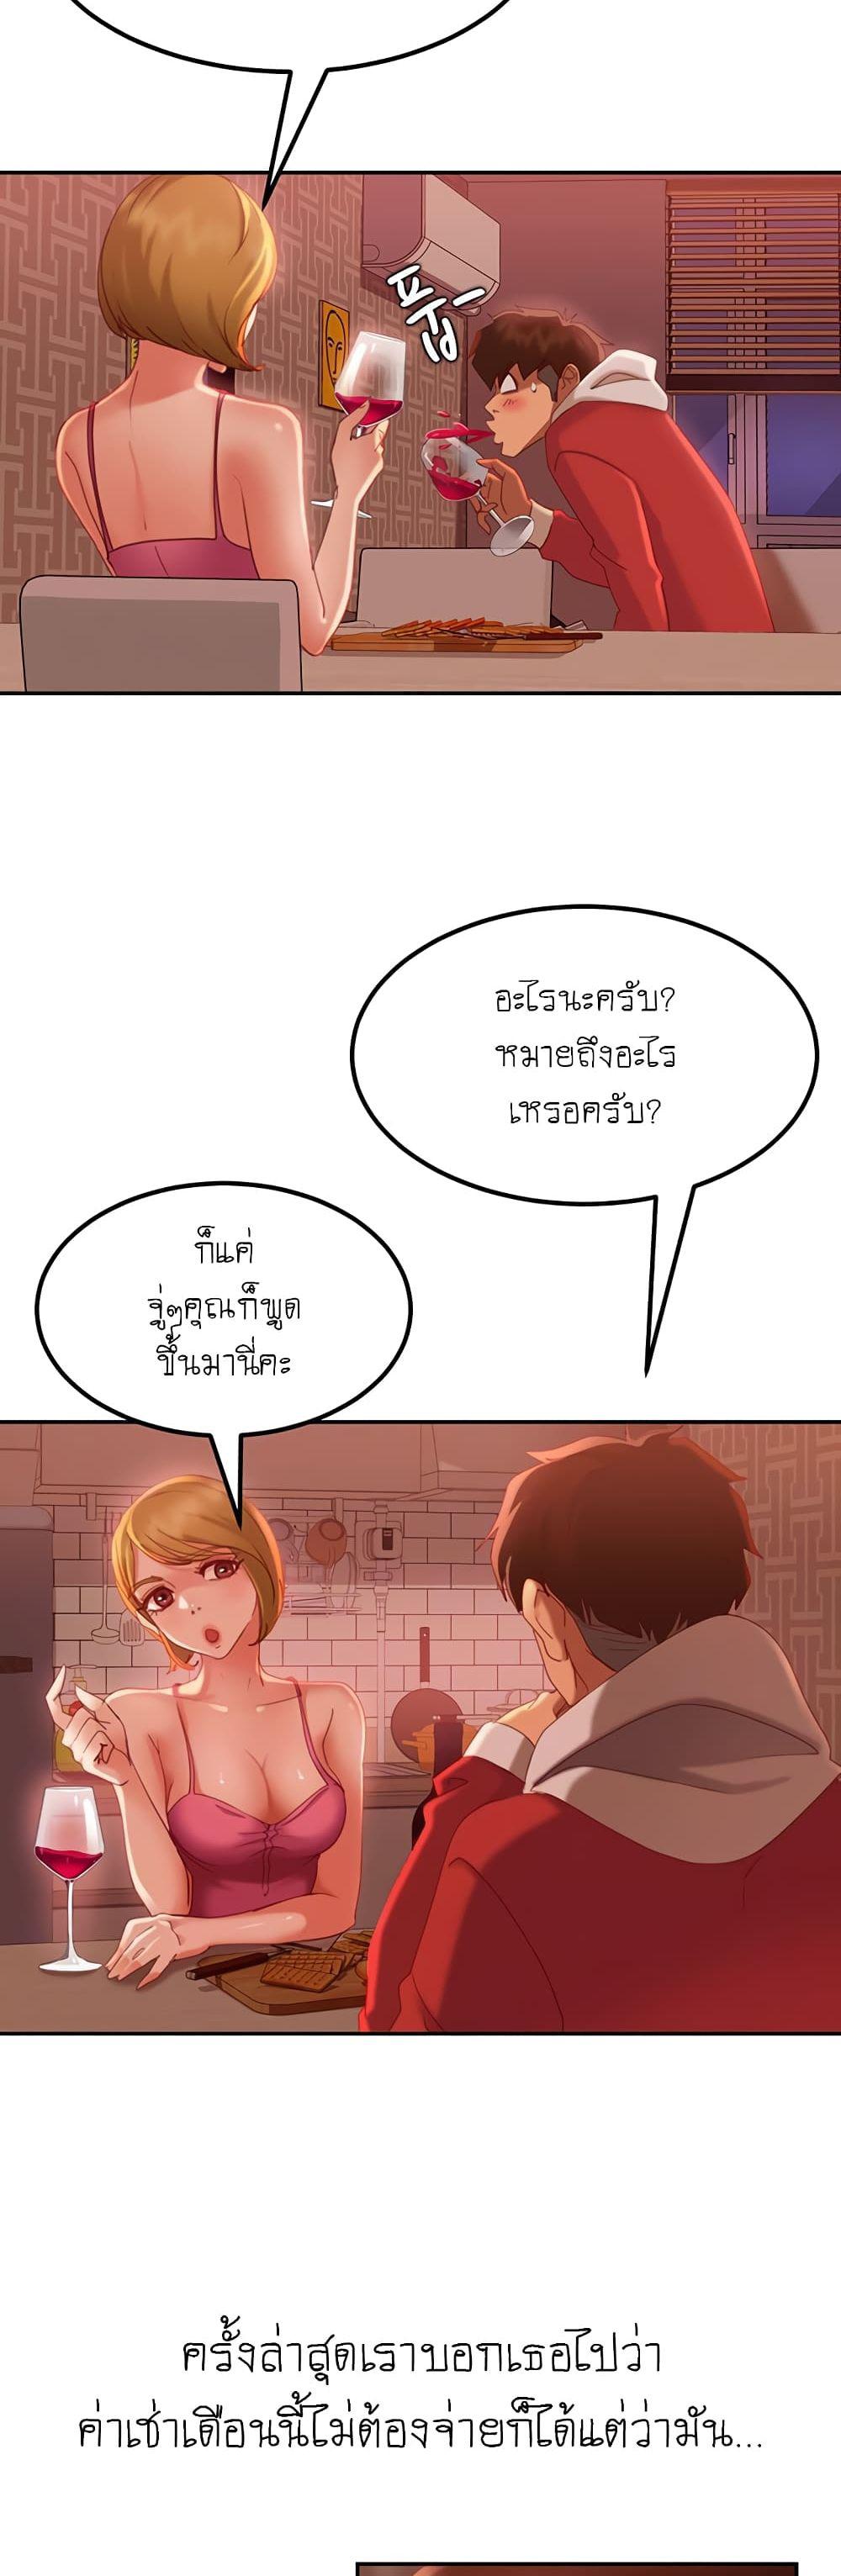 A Twisted Day 4 ภาพ 11